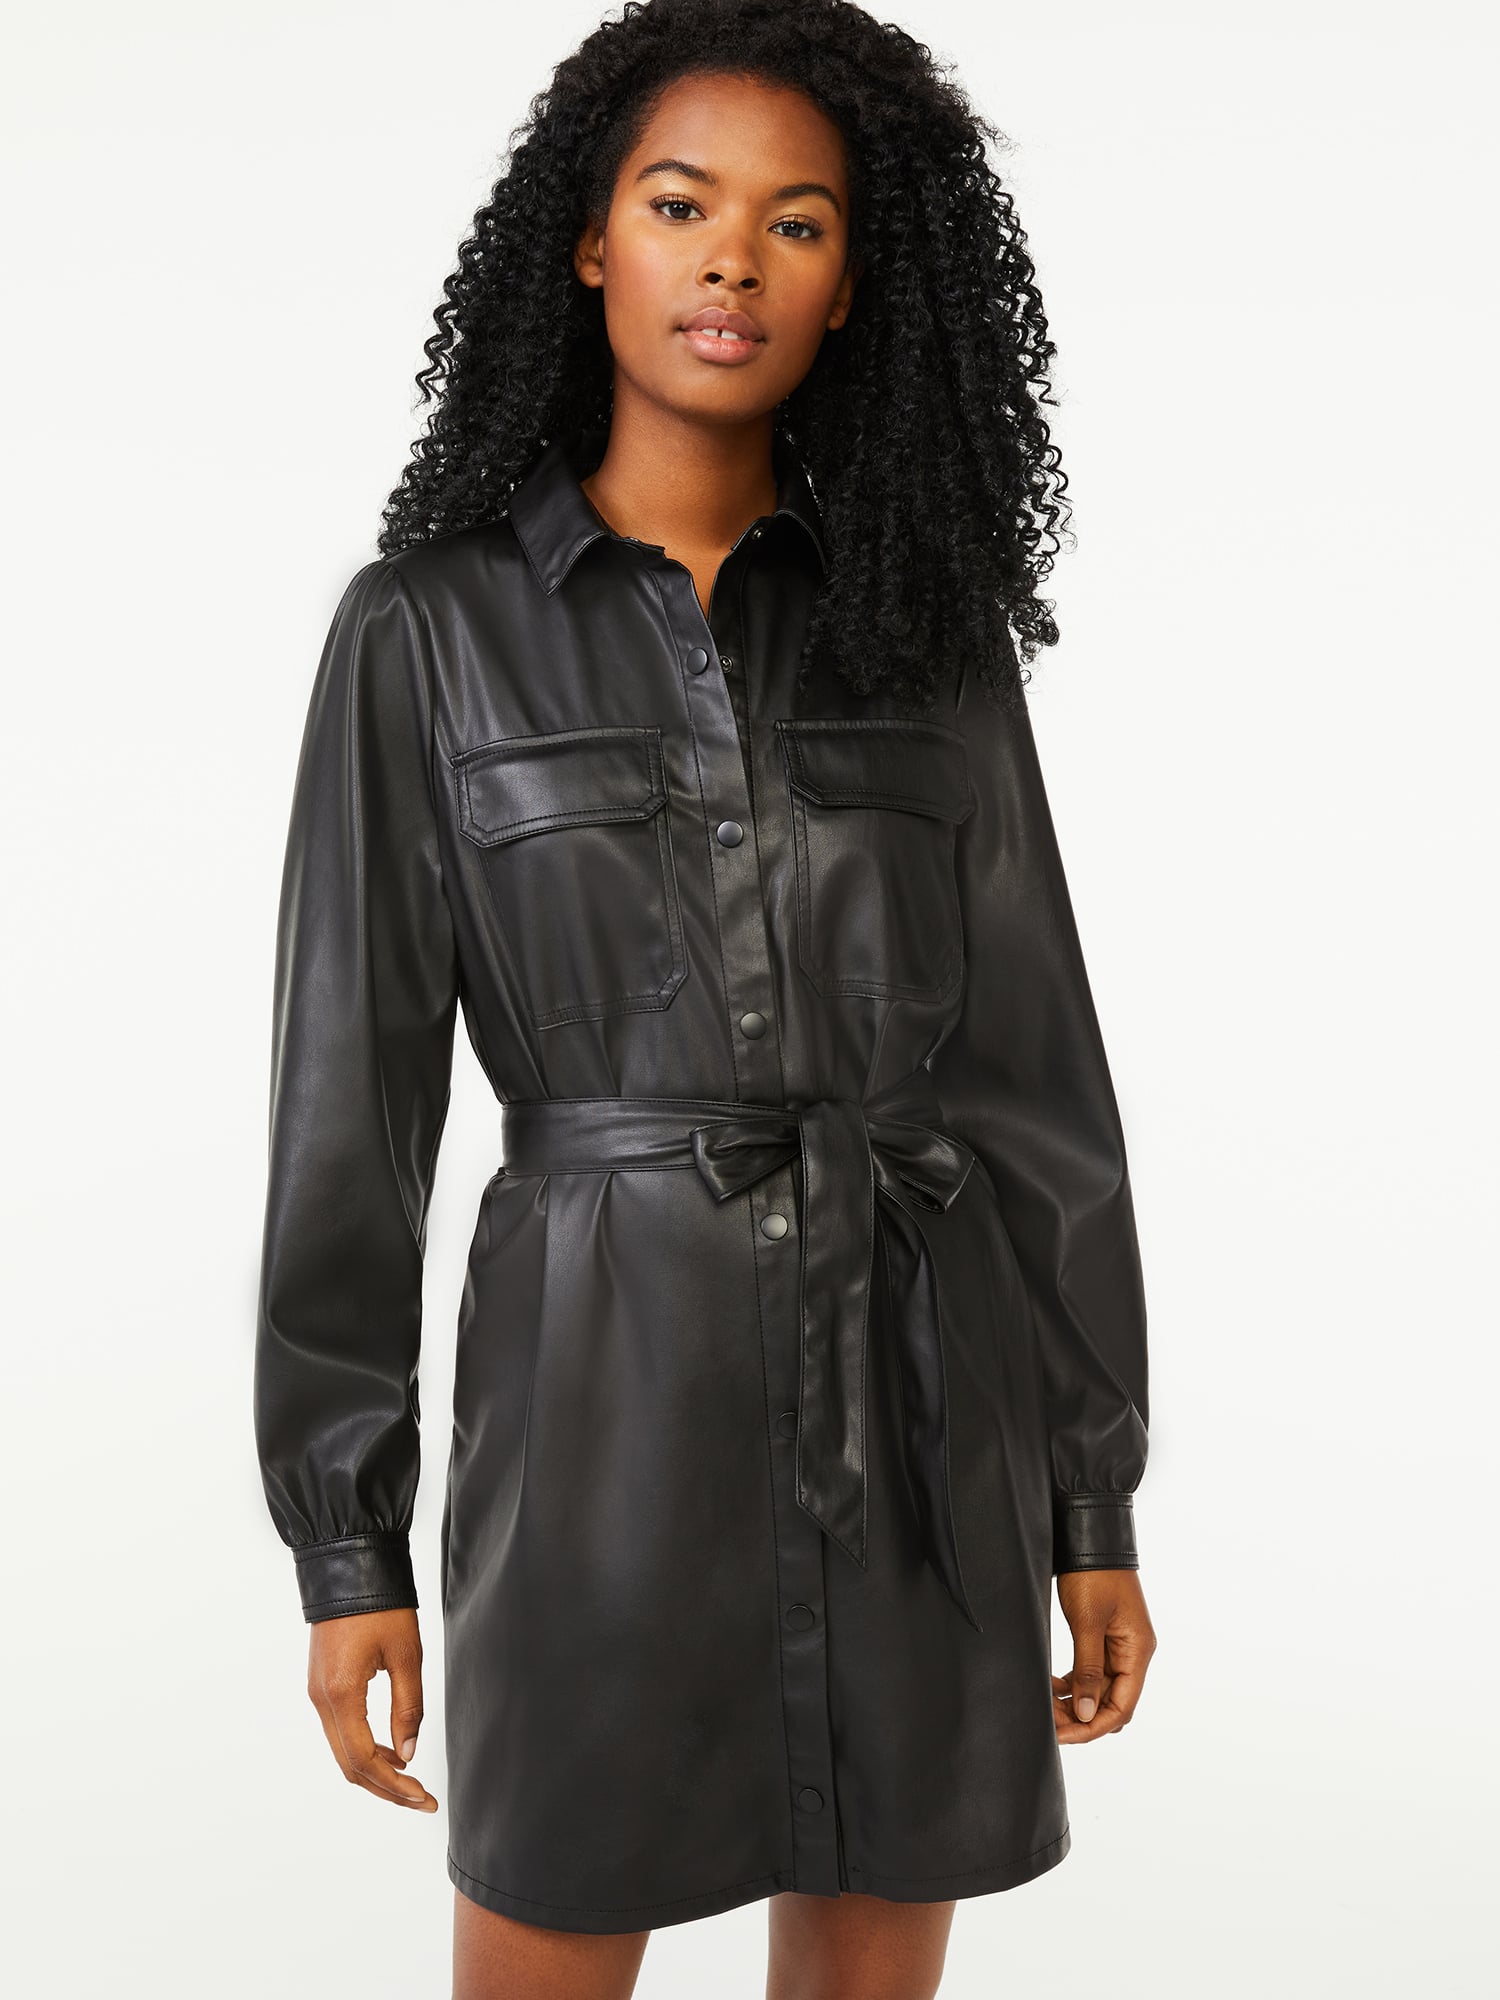 Scoop Women's Faux Leather Belted Shirt Dress, Scoop Fashion Is Fiercely  Underrated — Here Are 20 On-Trend Pieces to Prove It